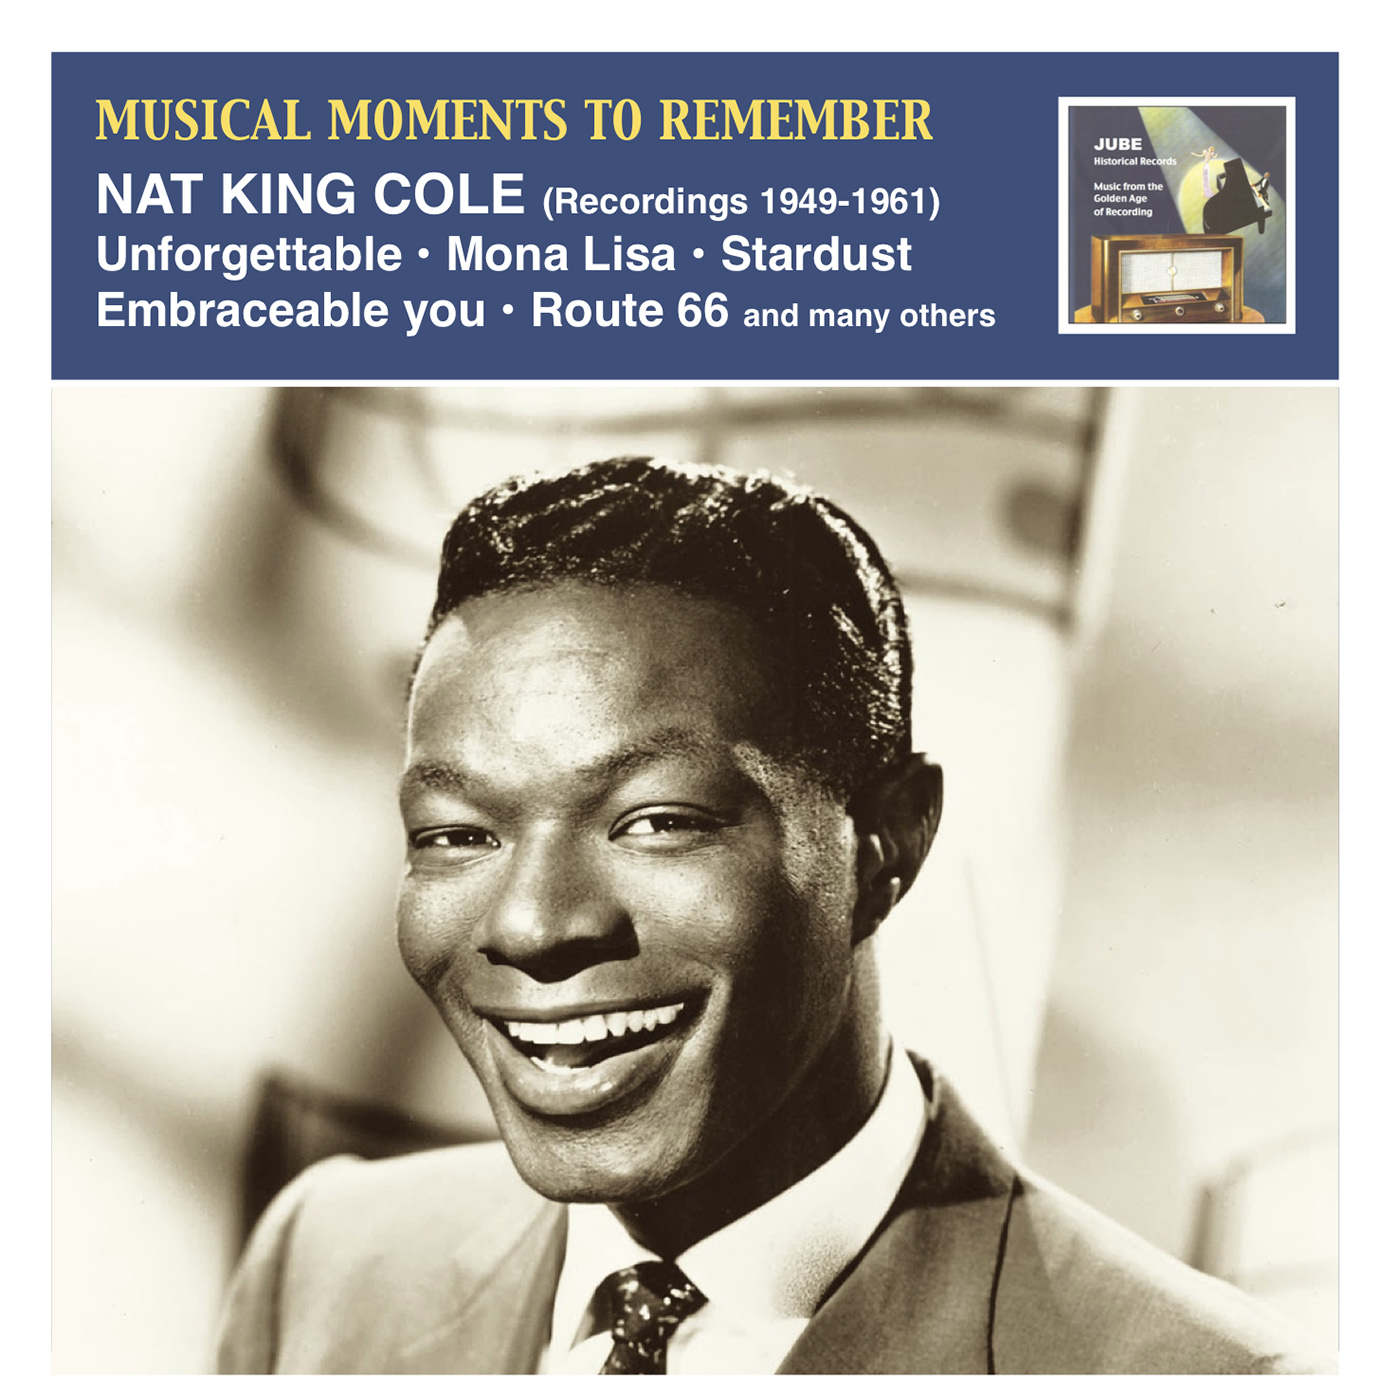 MUSICAL MOMENTS TO REMEMBER - Nat King Cole: Unforgettable! (1949-1961)